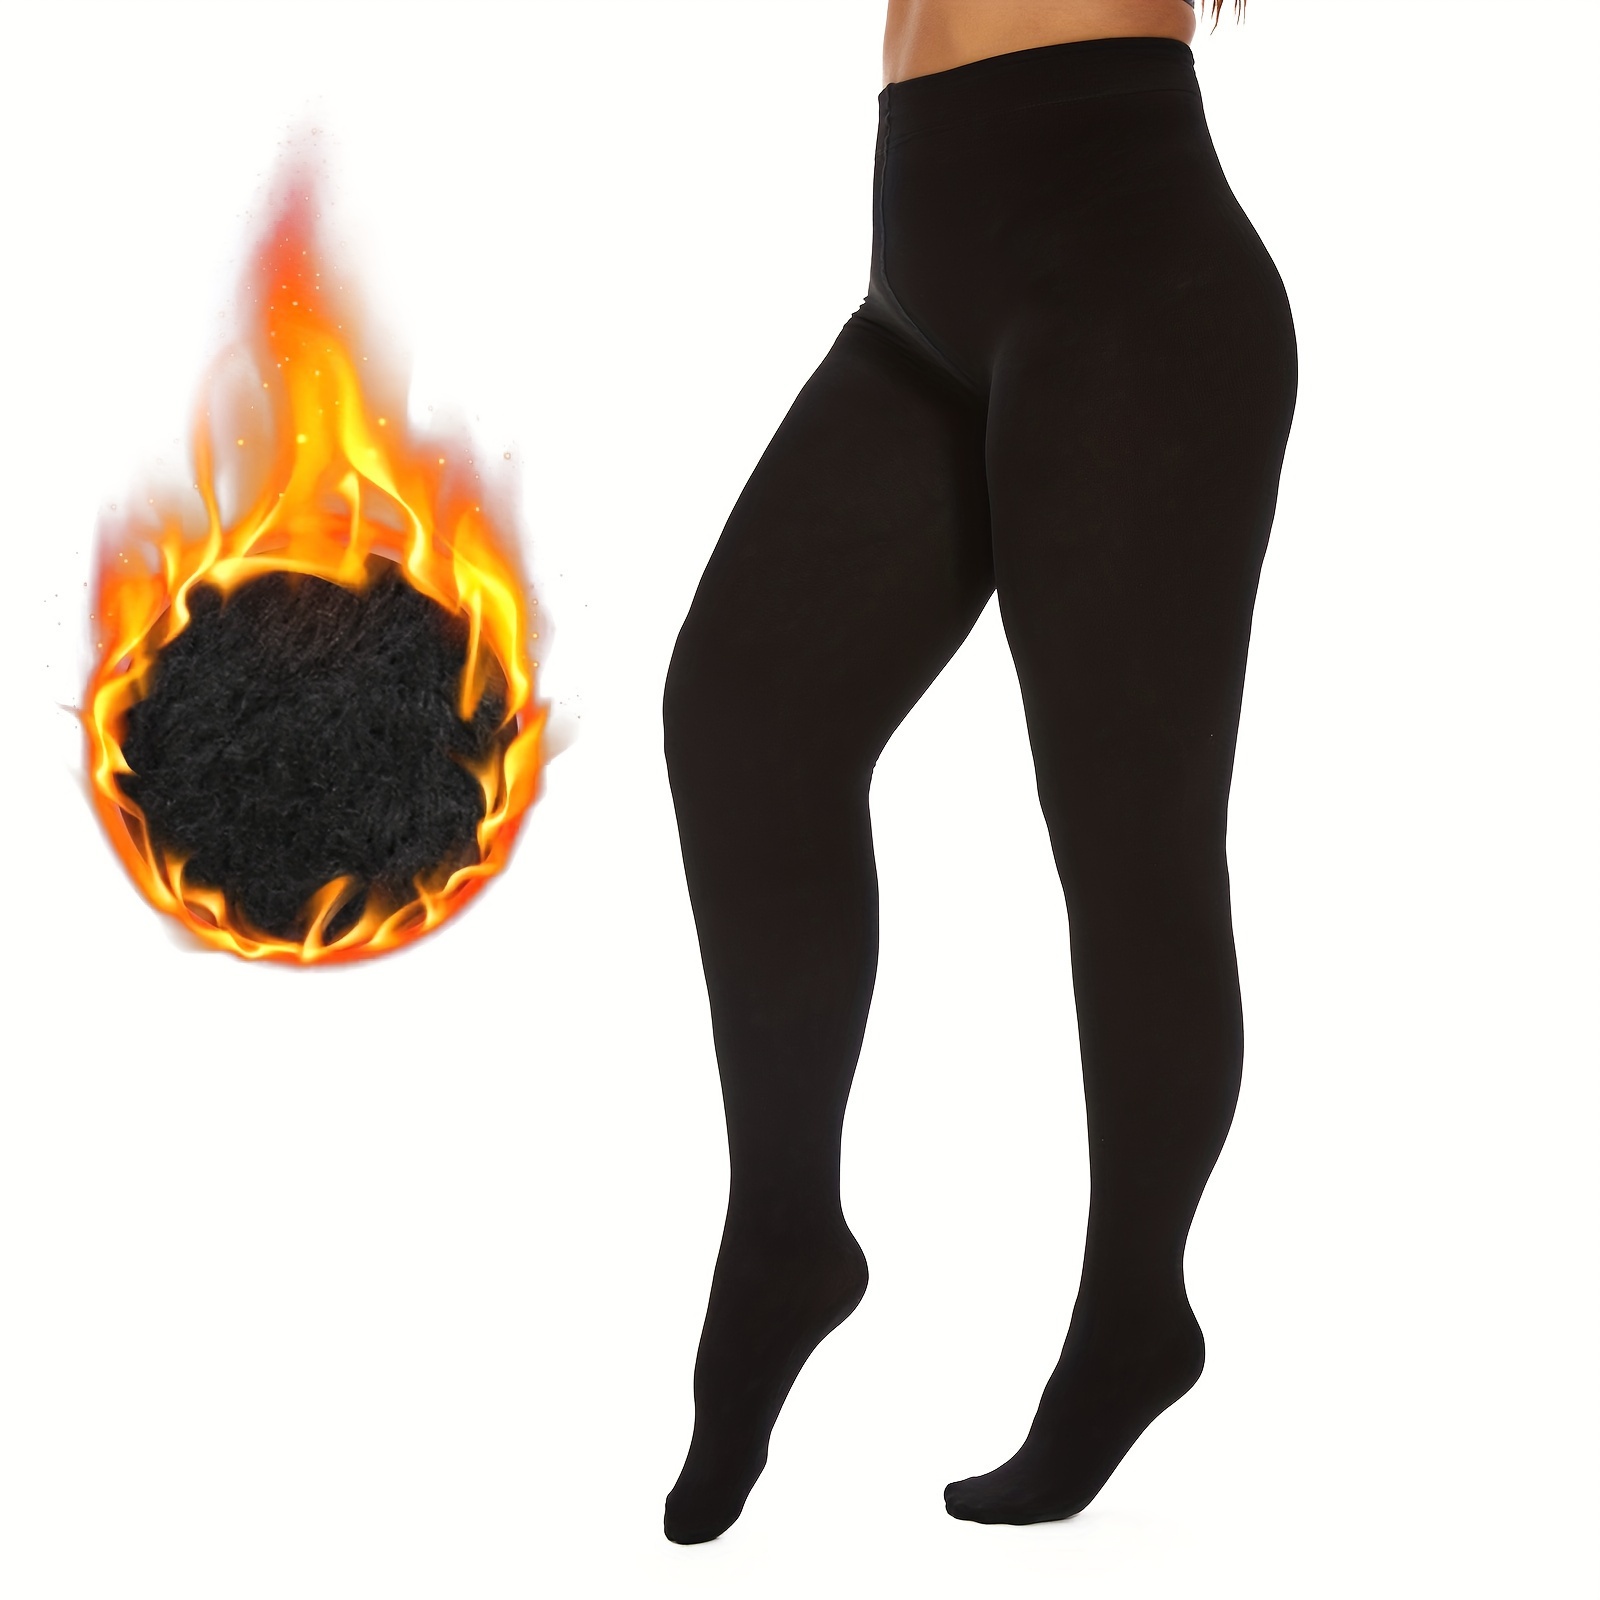 Women Tights Ladies Warm Winter Tights Leggings Thick Panty